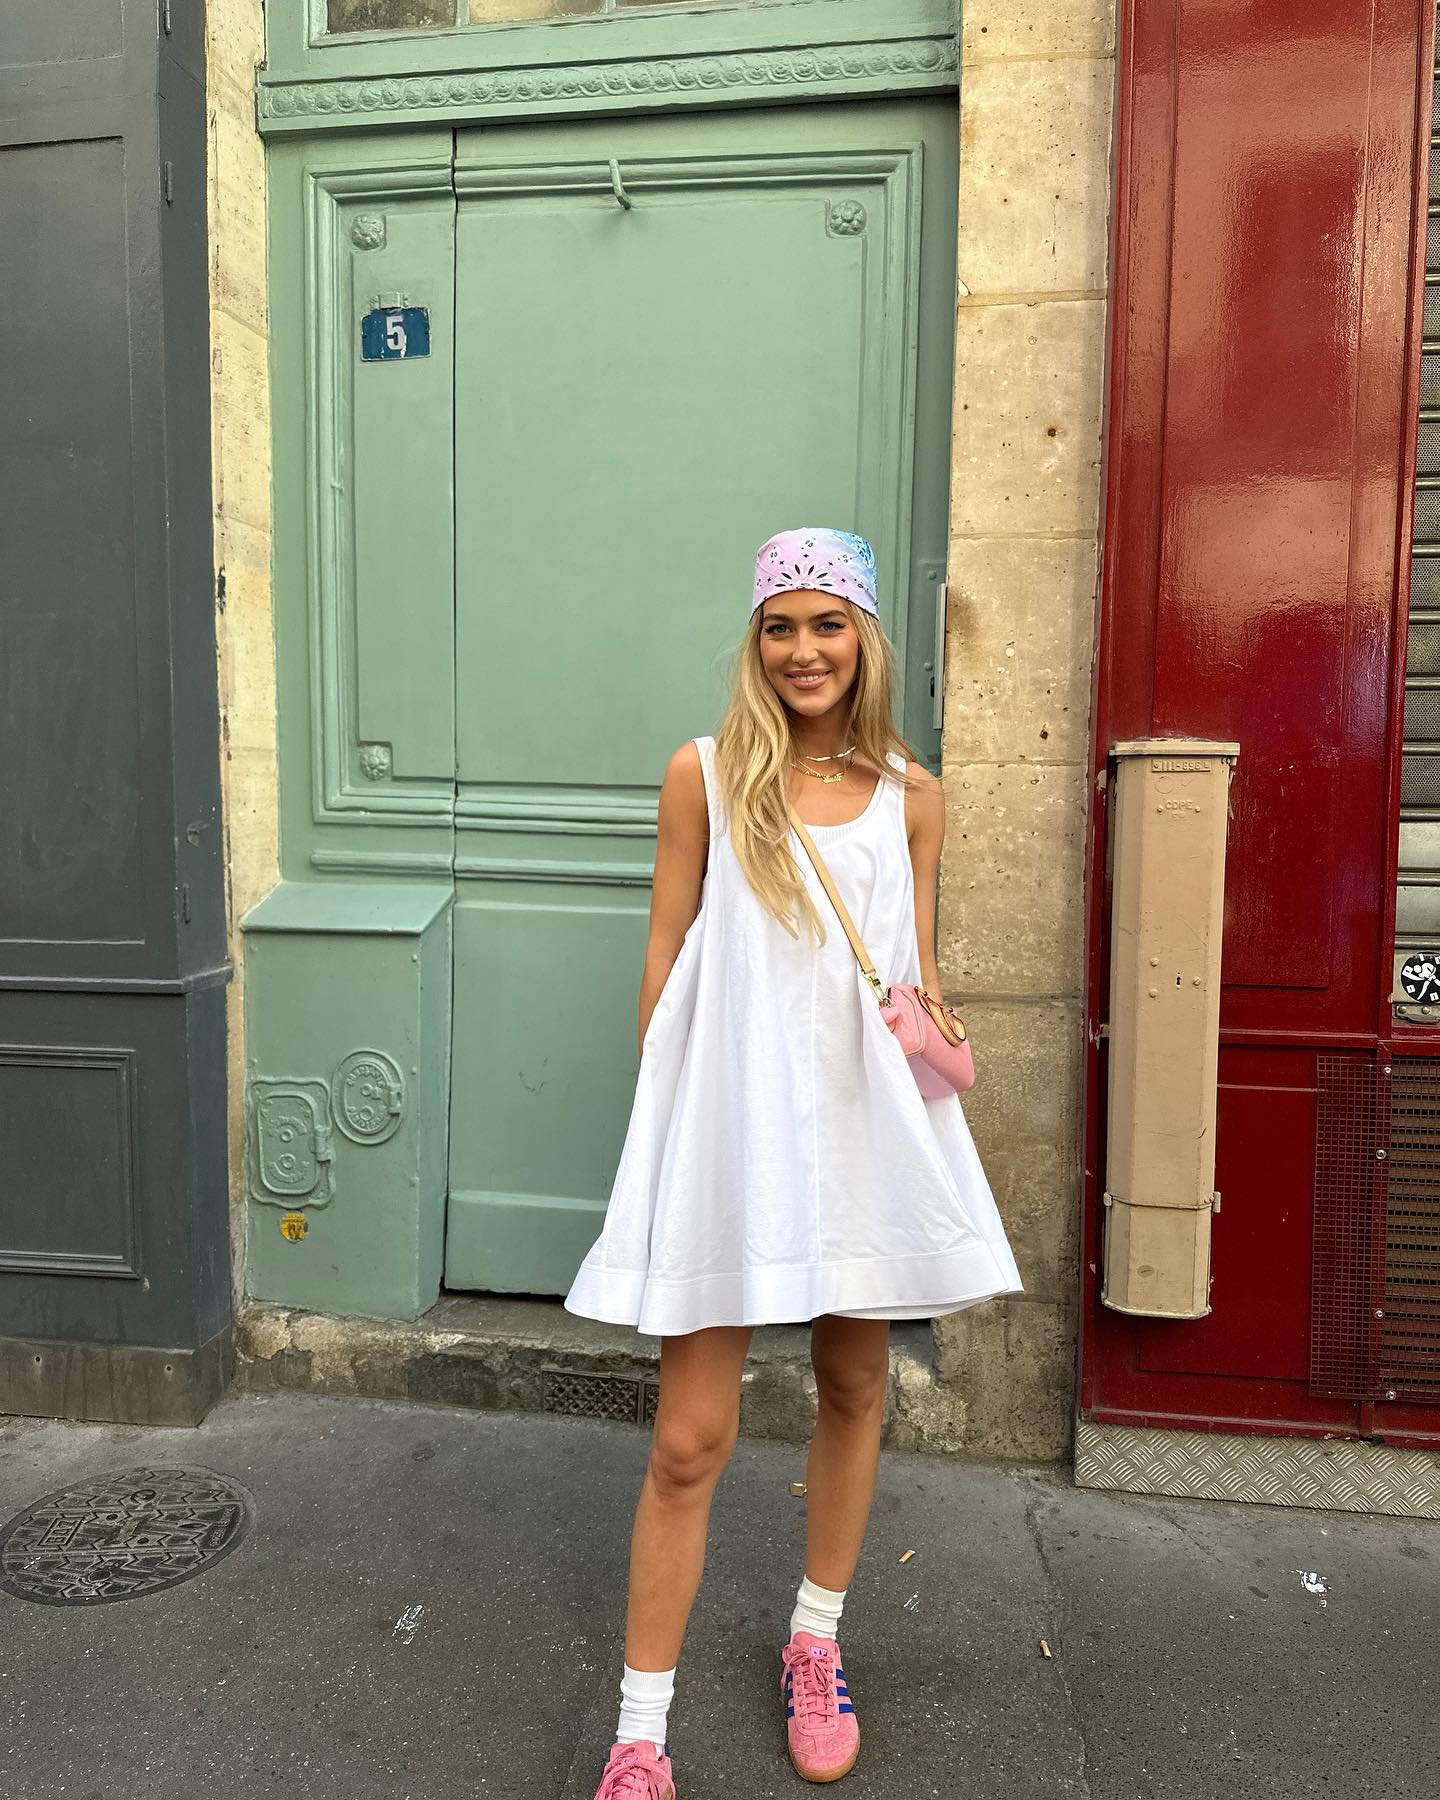 Emili Sindlev wearing a white dress and sneakers